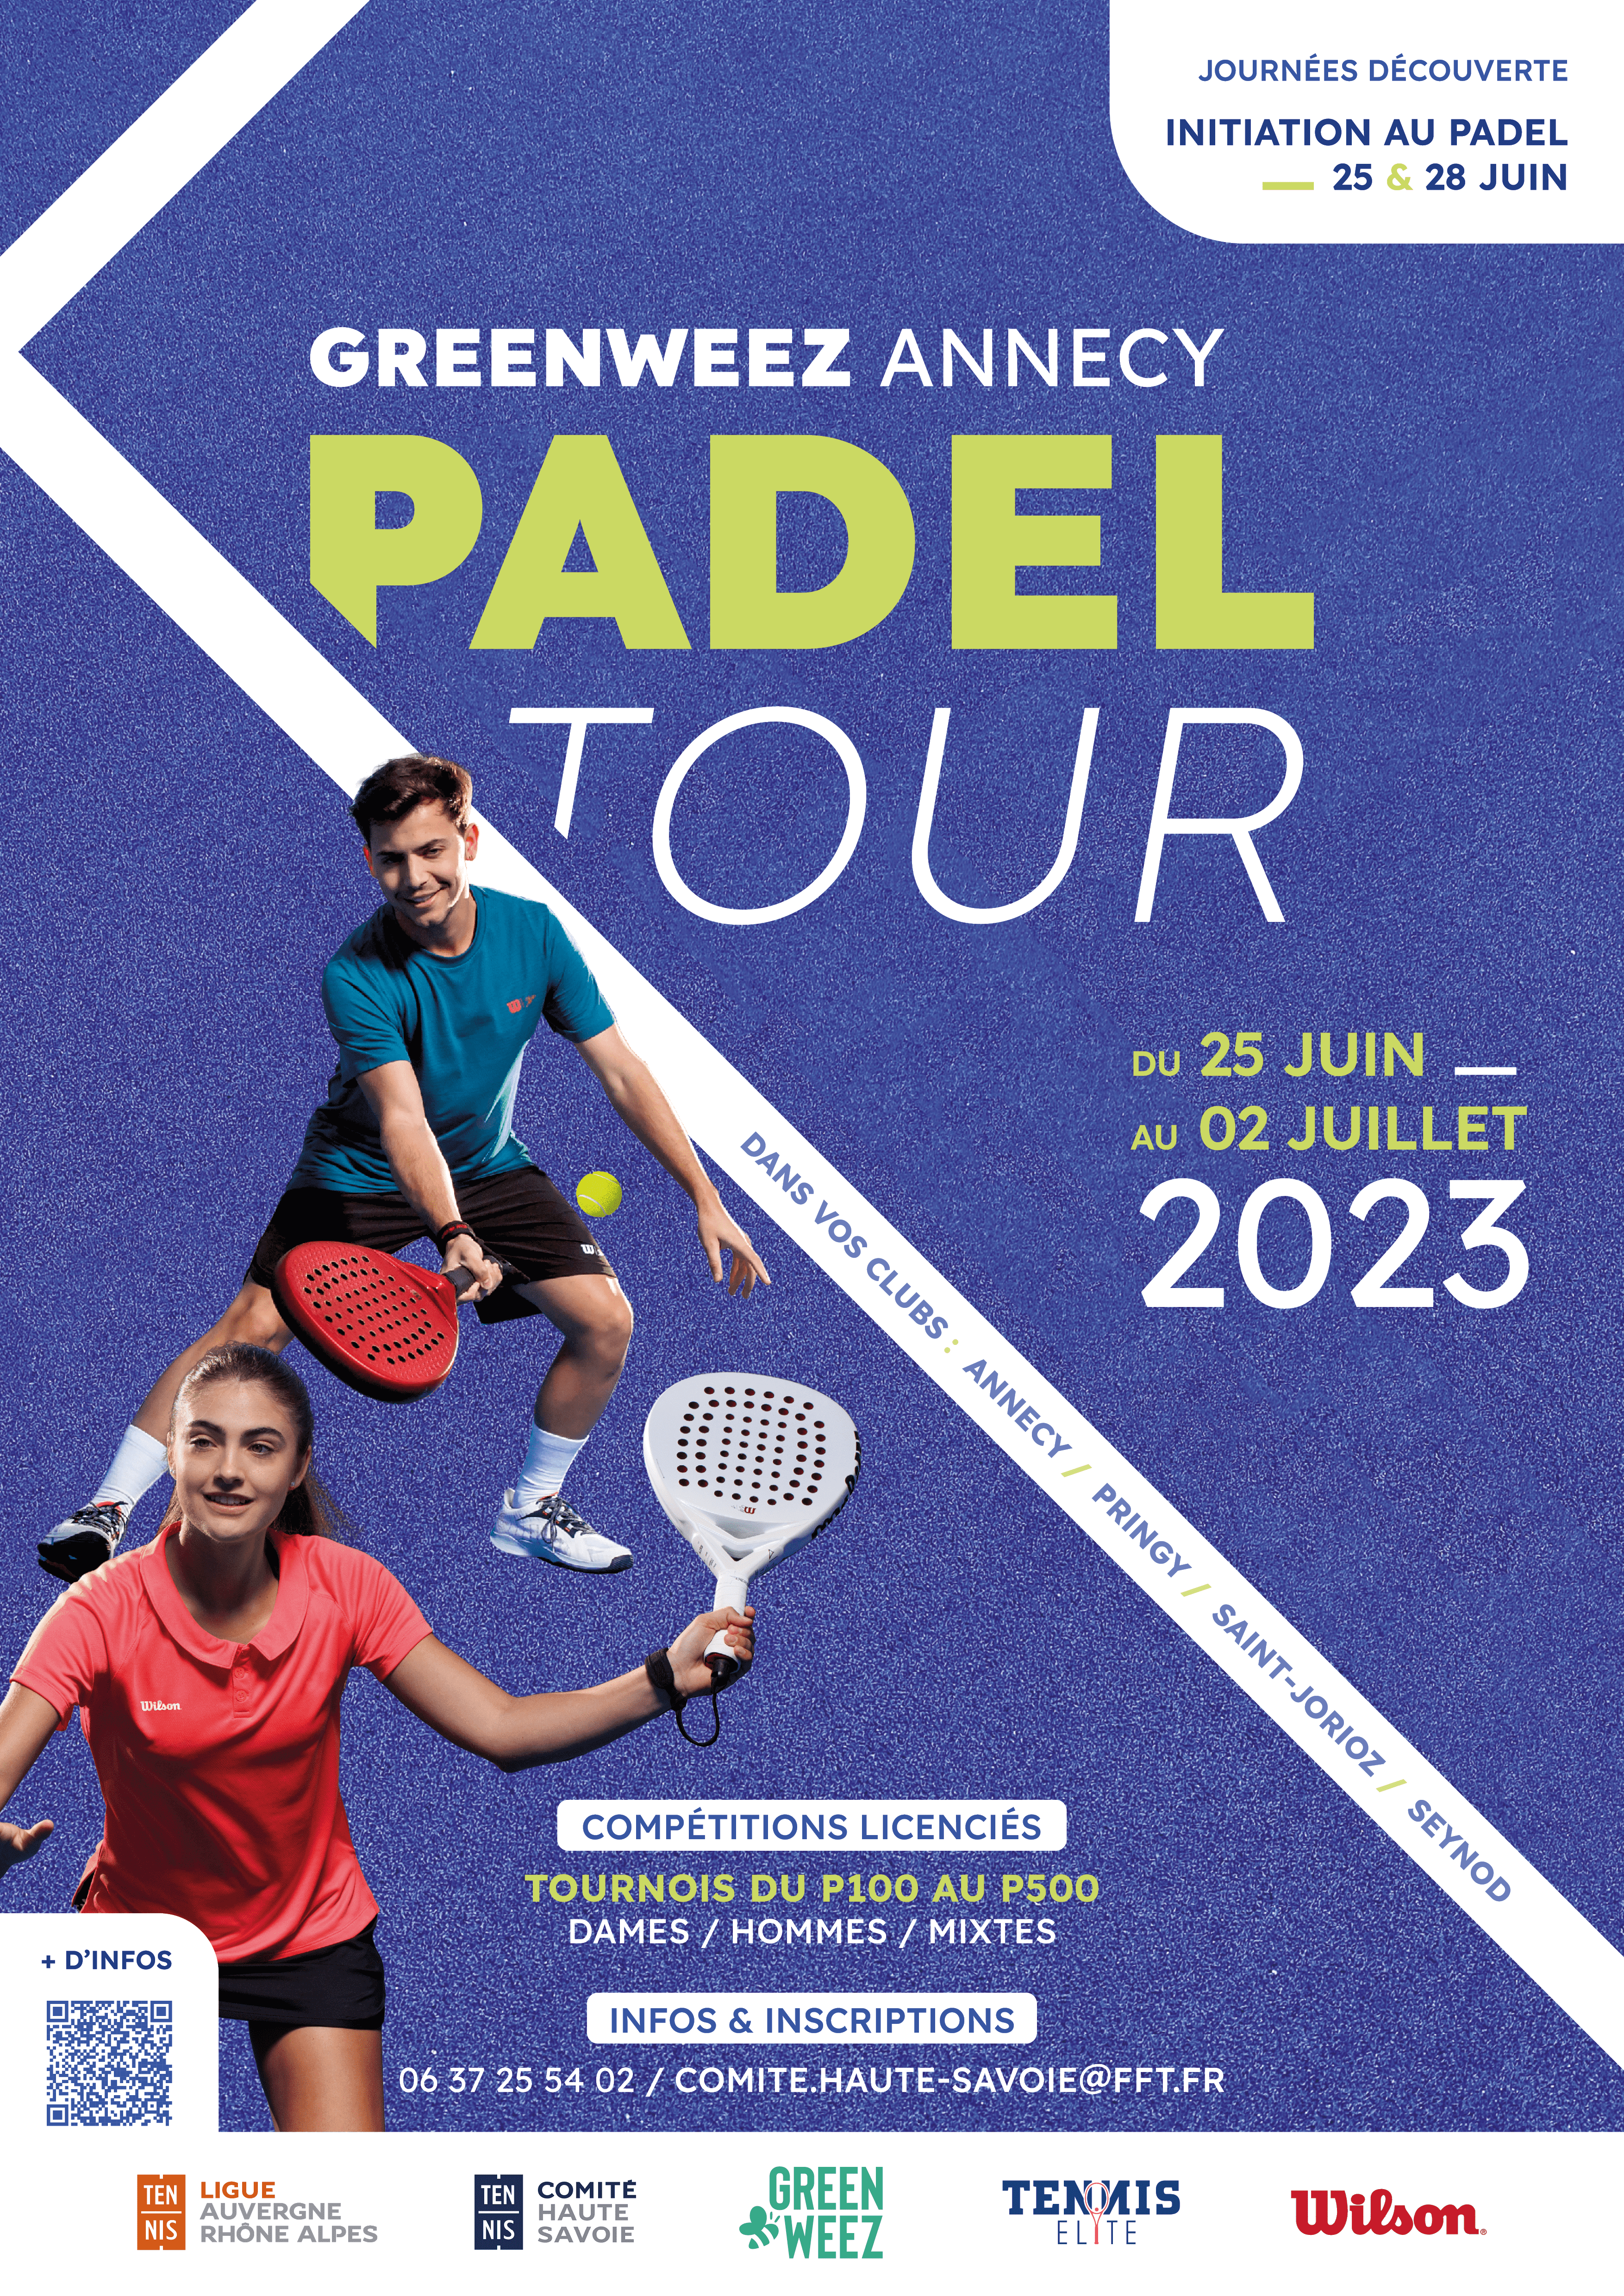 Greenweez Annecy Padel Tour 2023